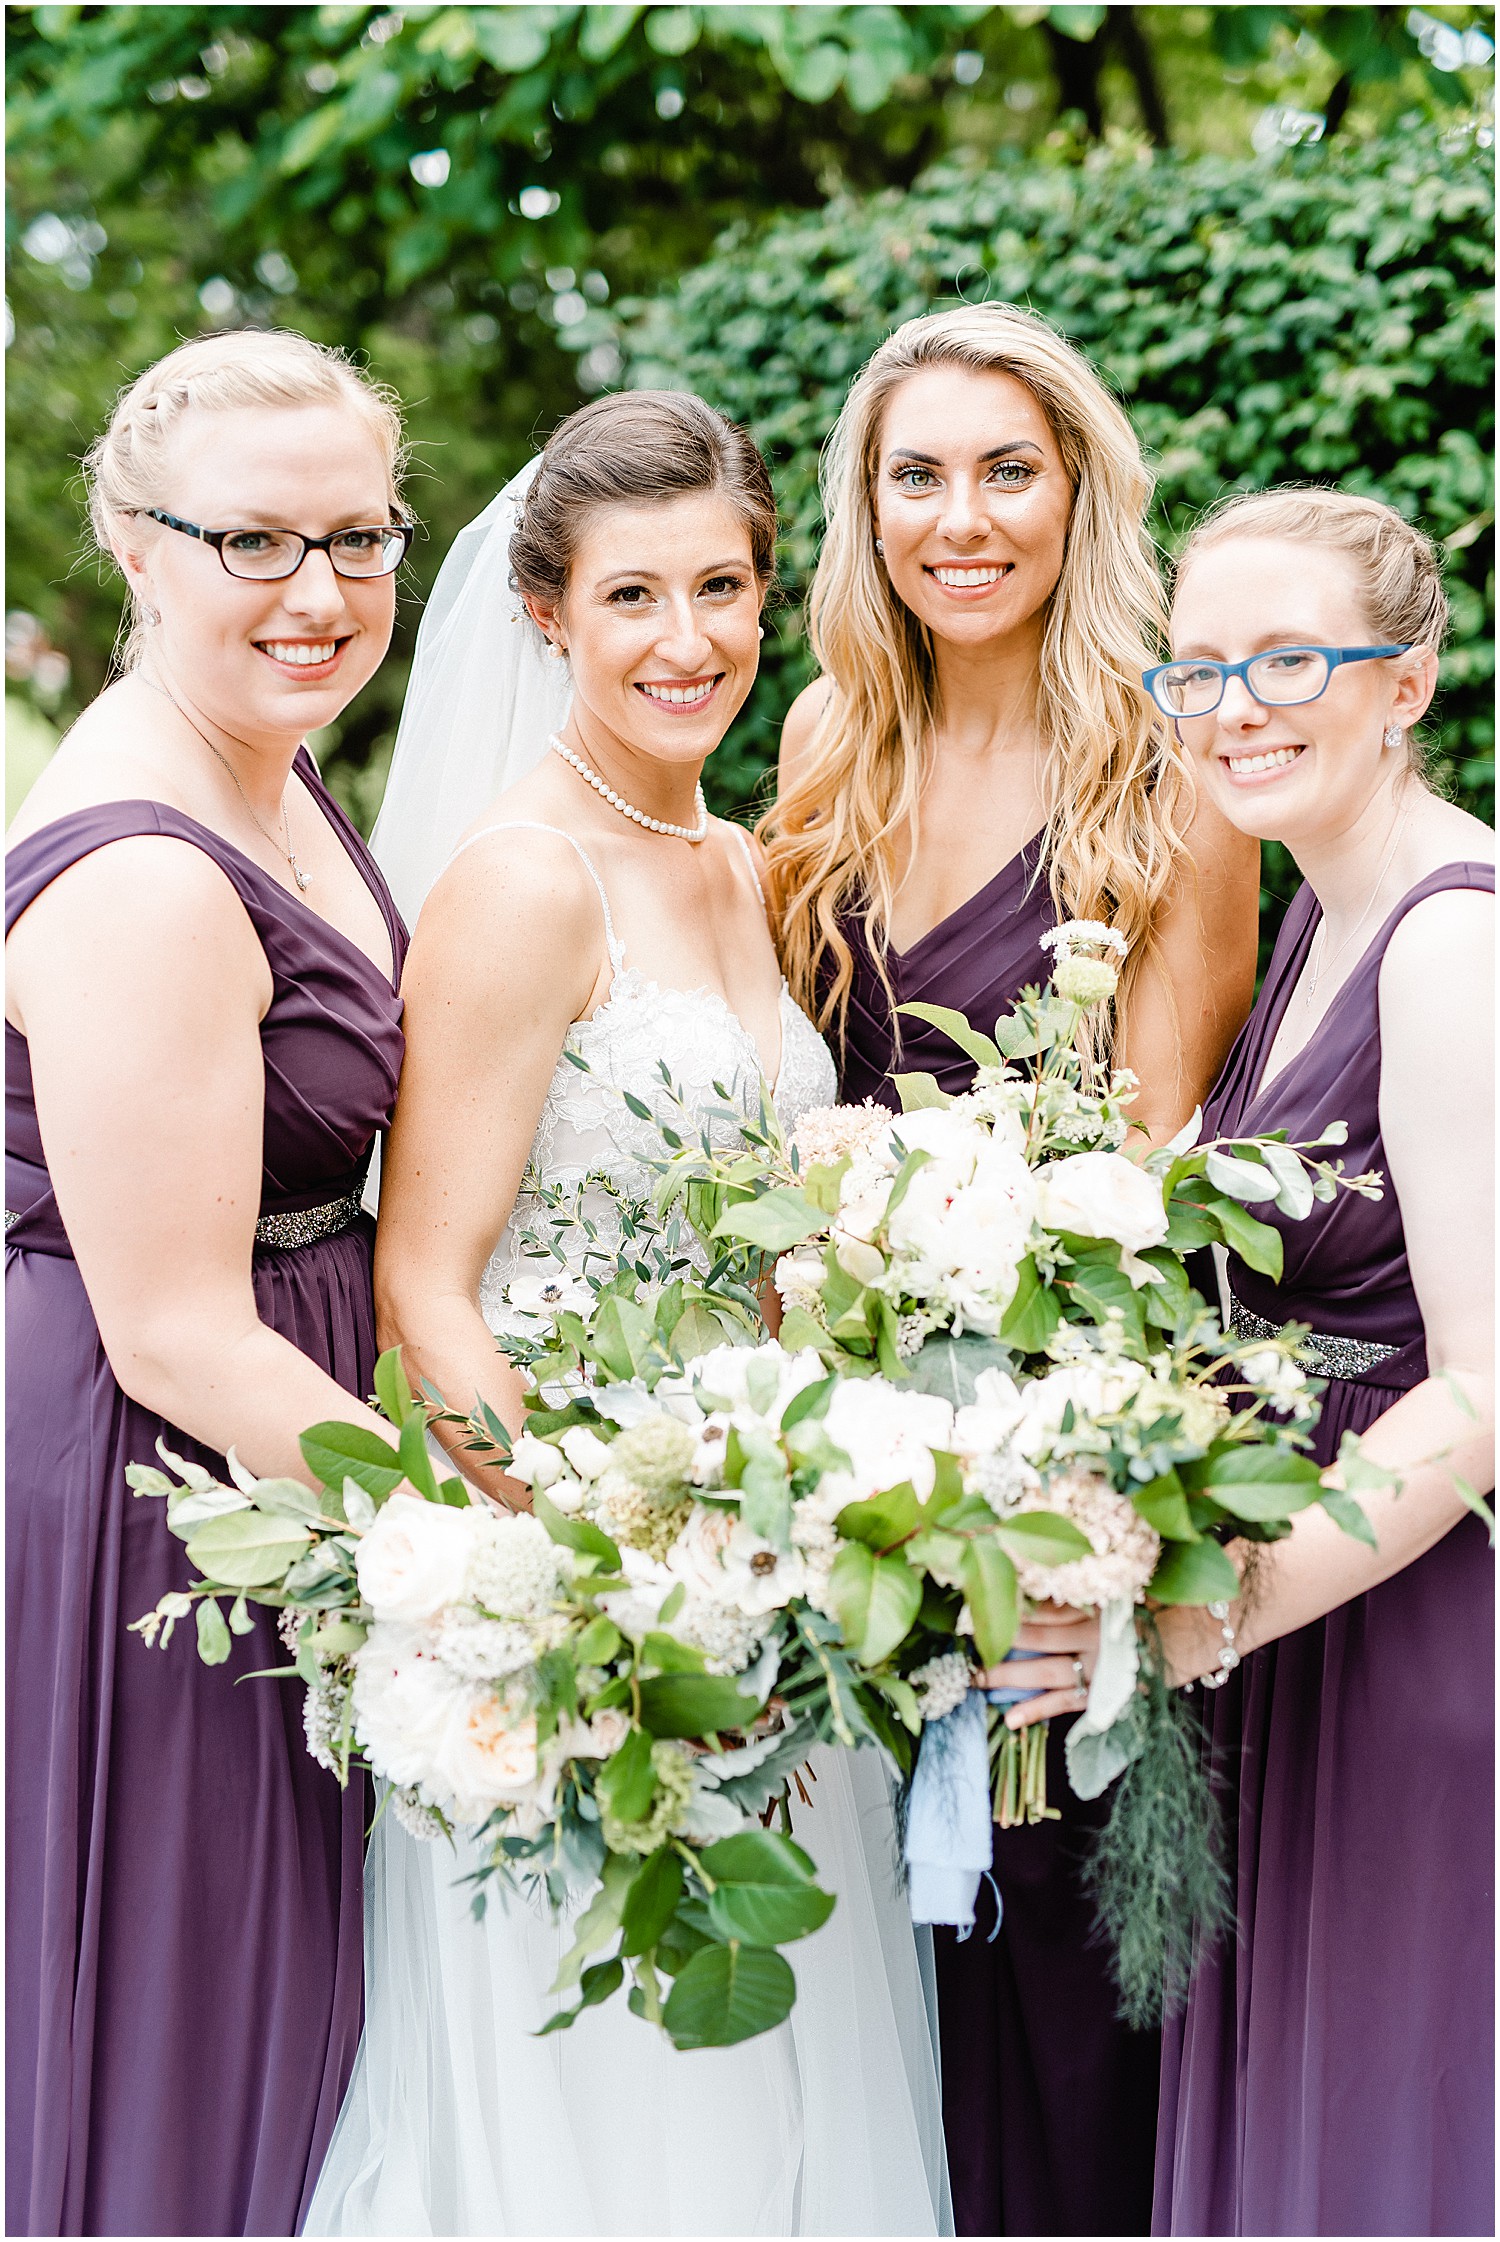 bride and bridesmaids smile at the camera holding green and white bouquets